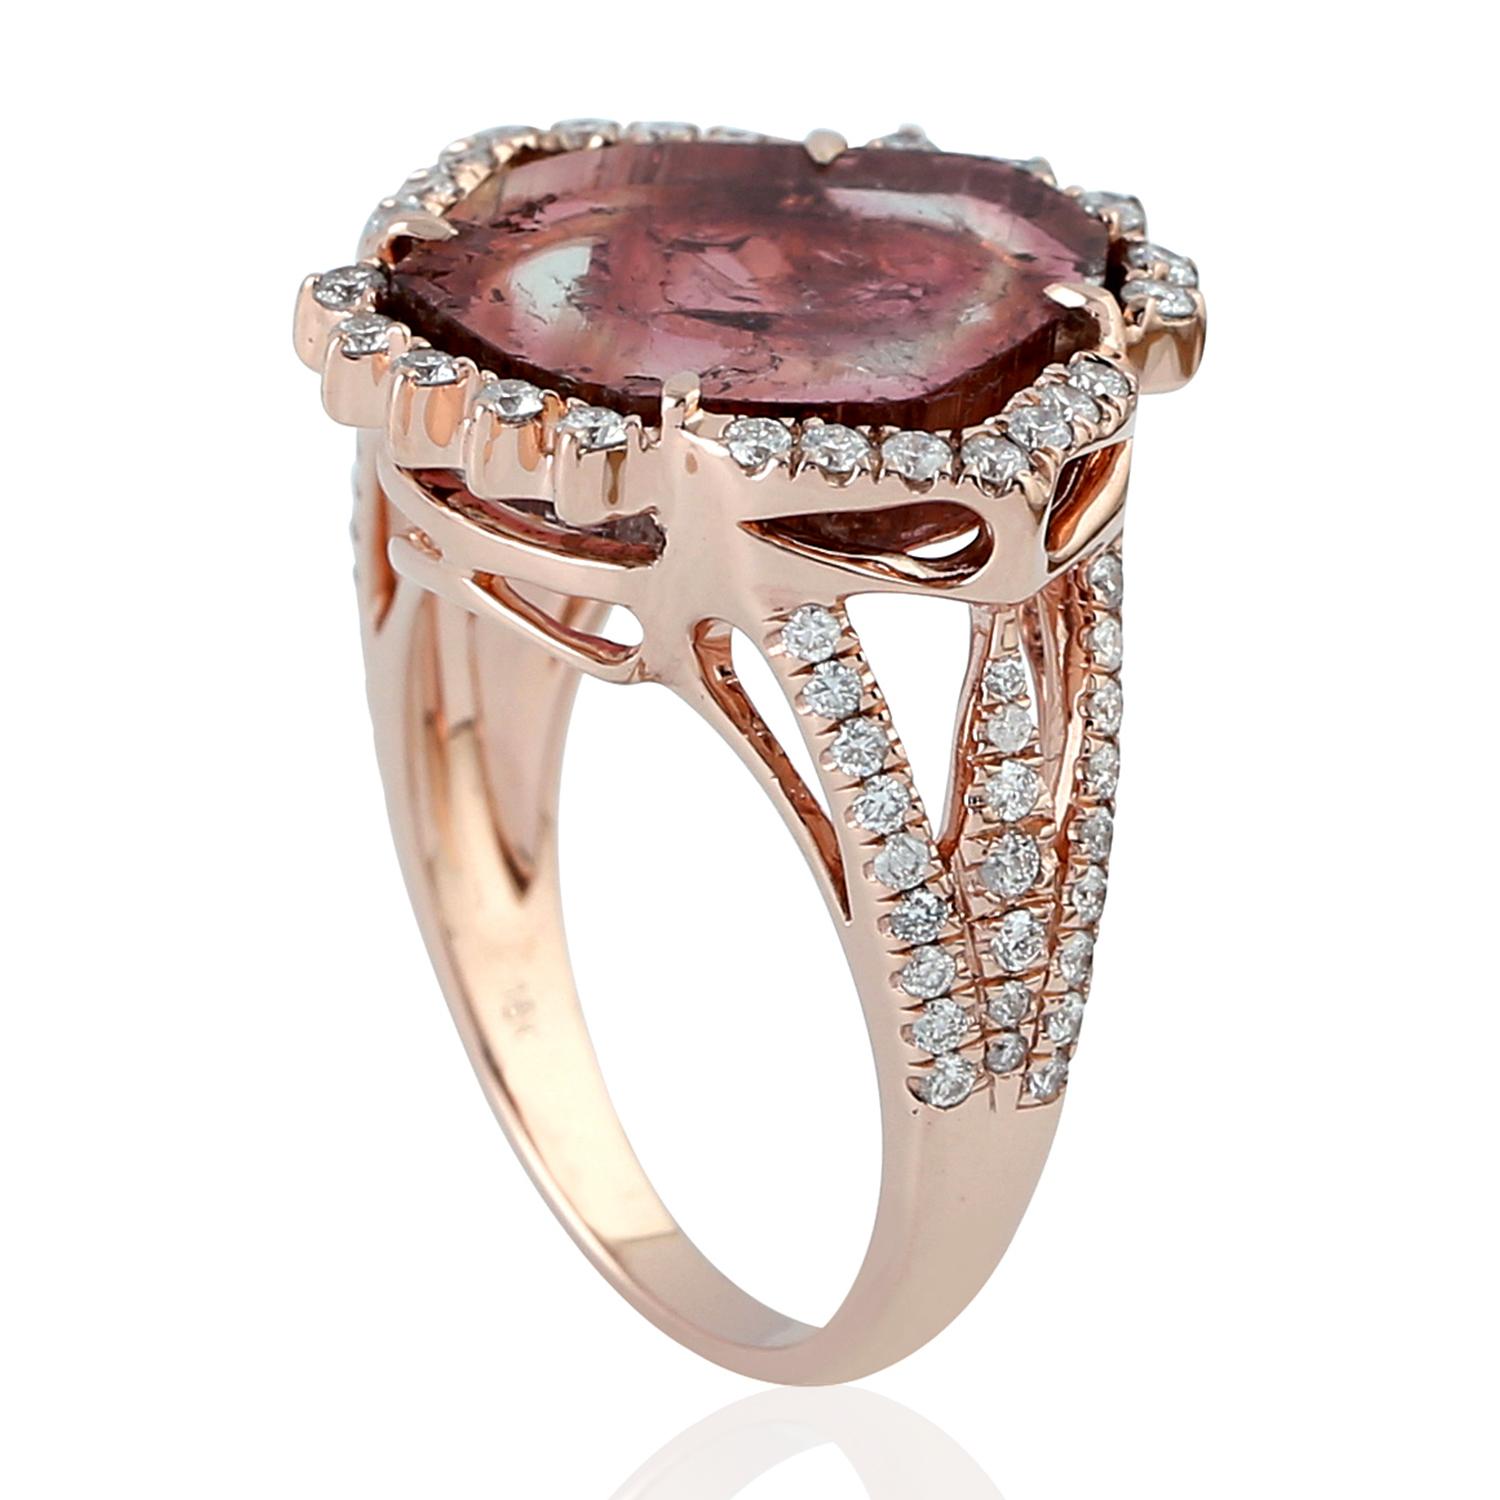 Watermelon Tourmaline Stone Cocktail Ring with Pave Diamond Made in 18k Gold In New Condition For Sale In New York, NY